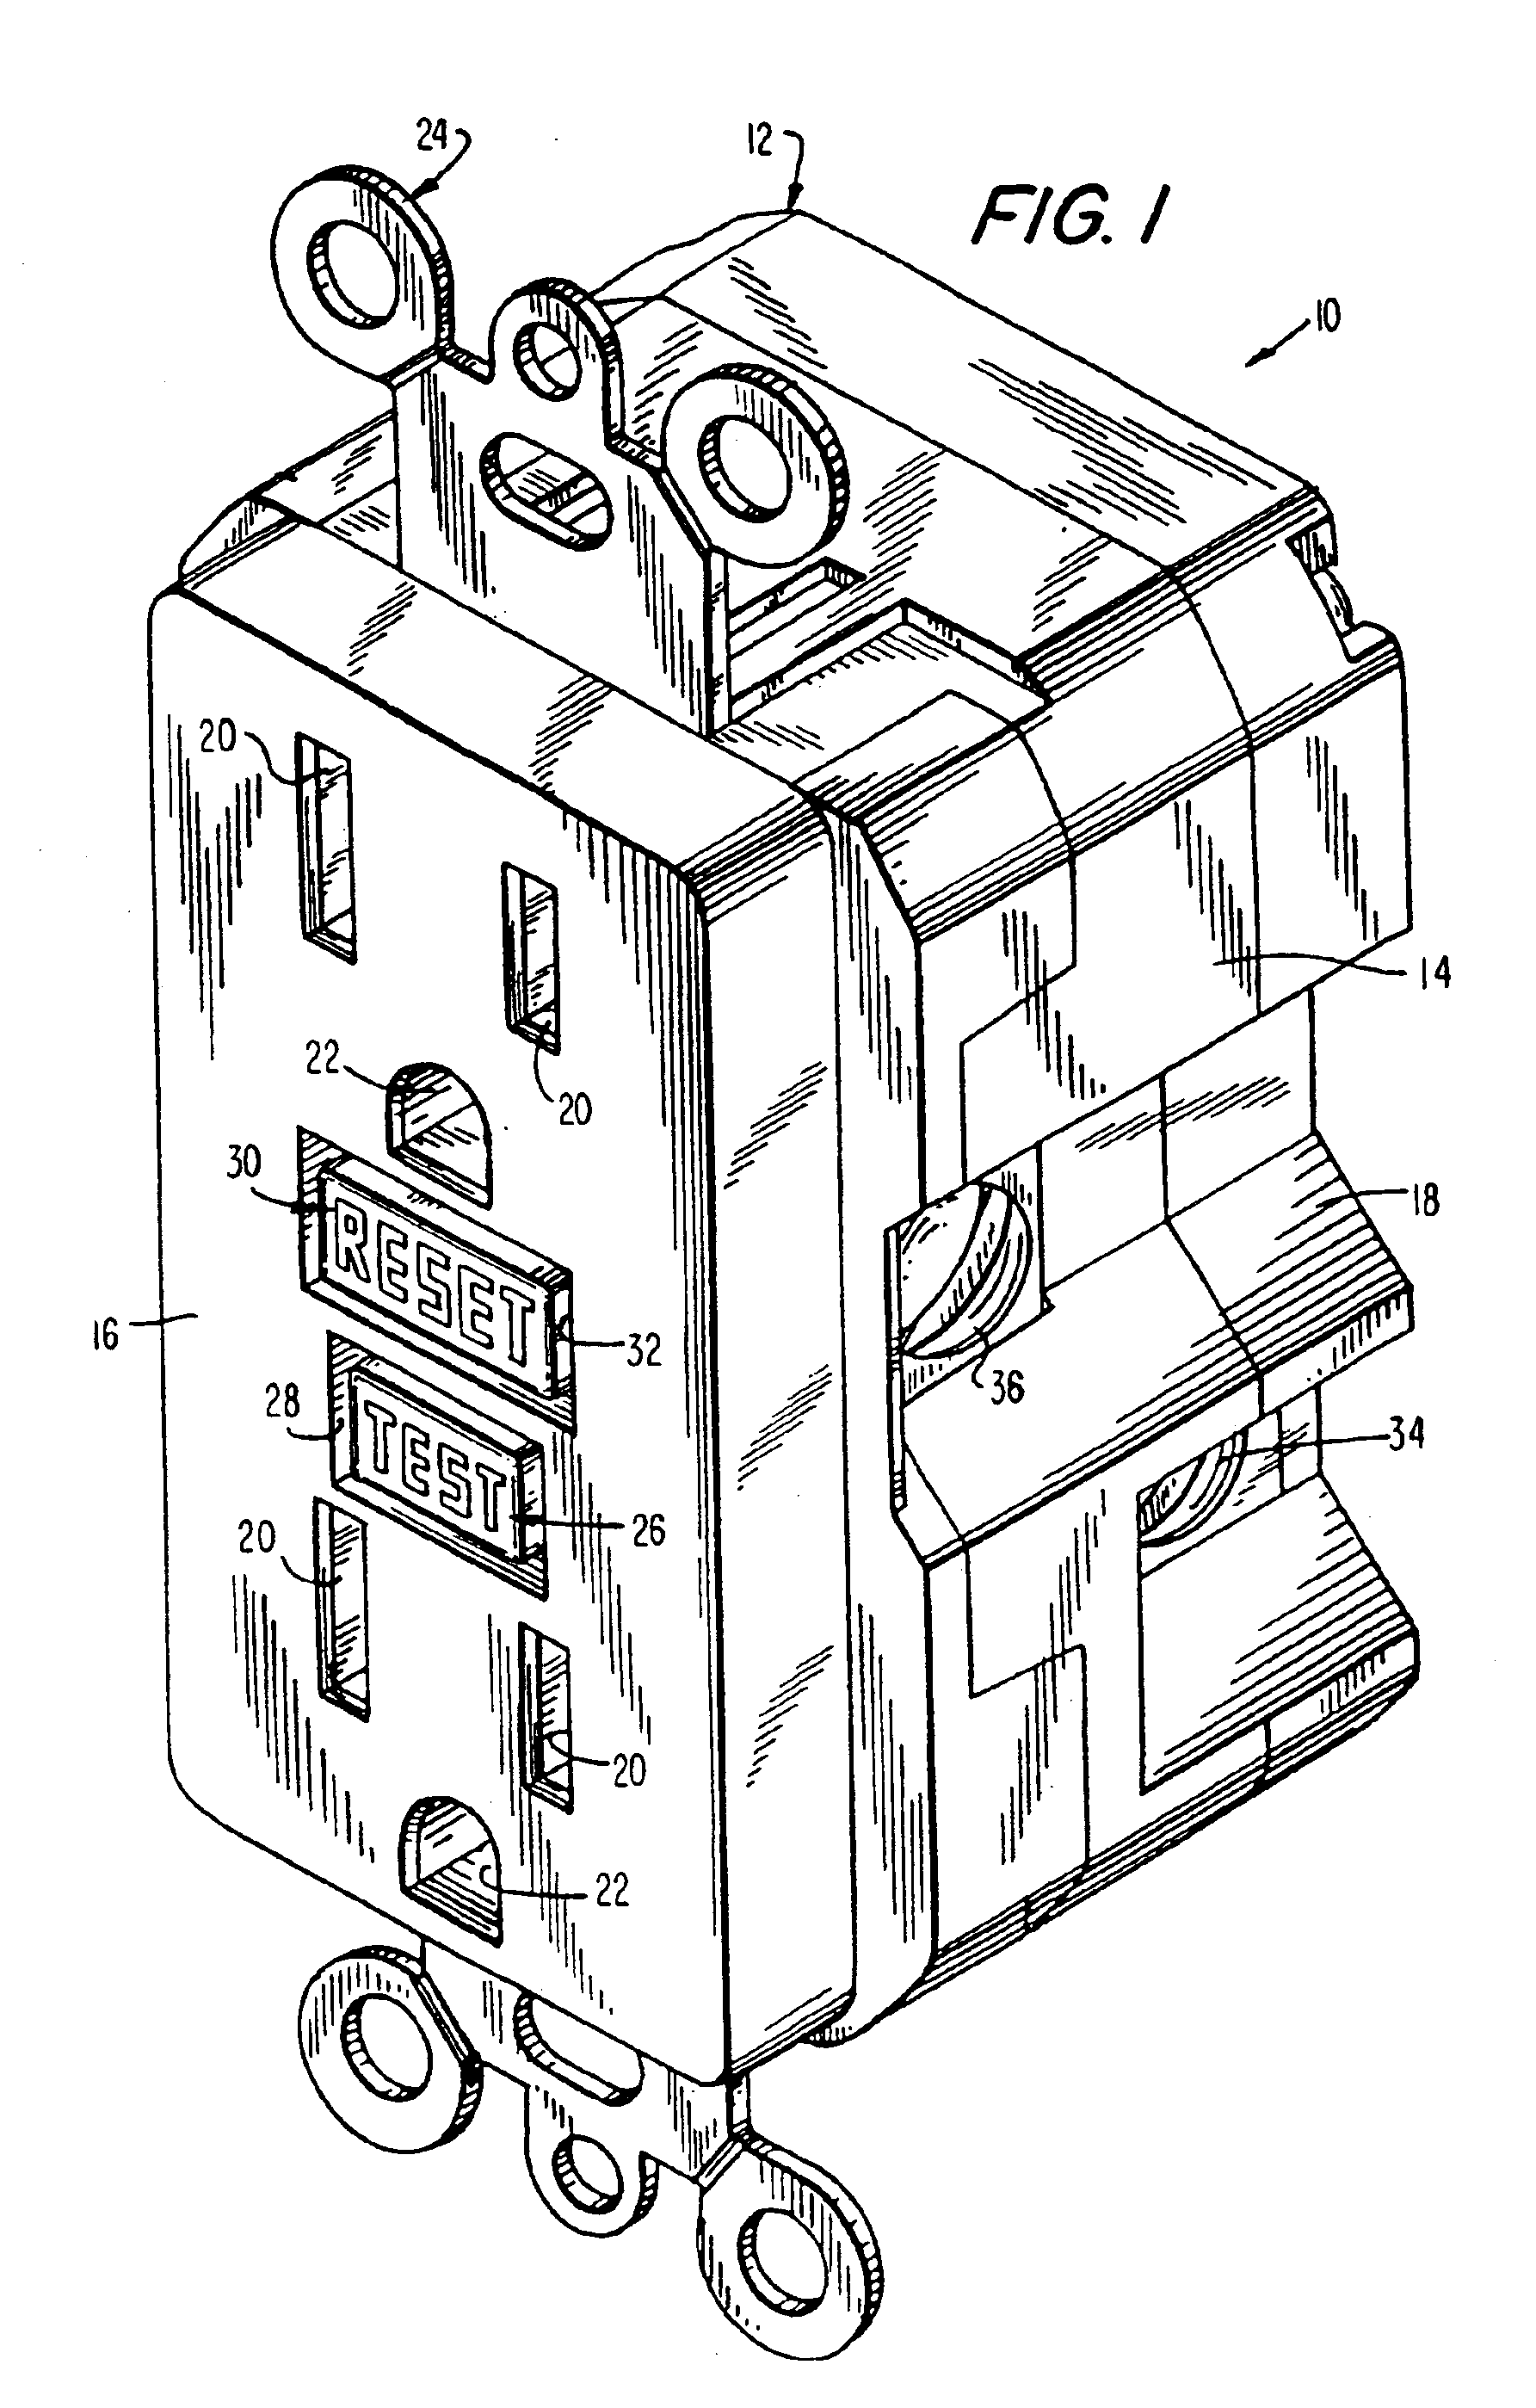 Reset lockout for circuit interrupting device